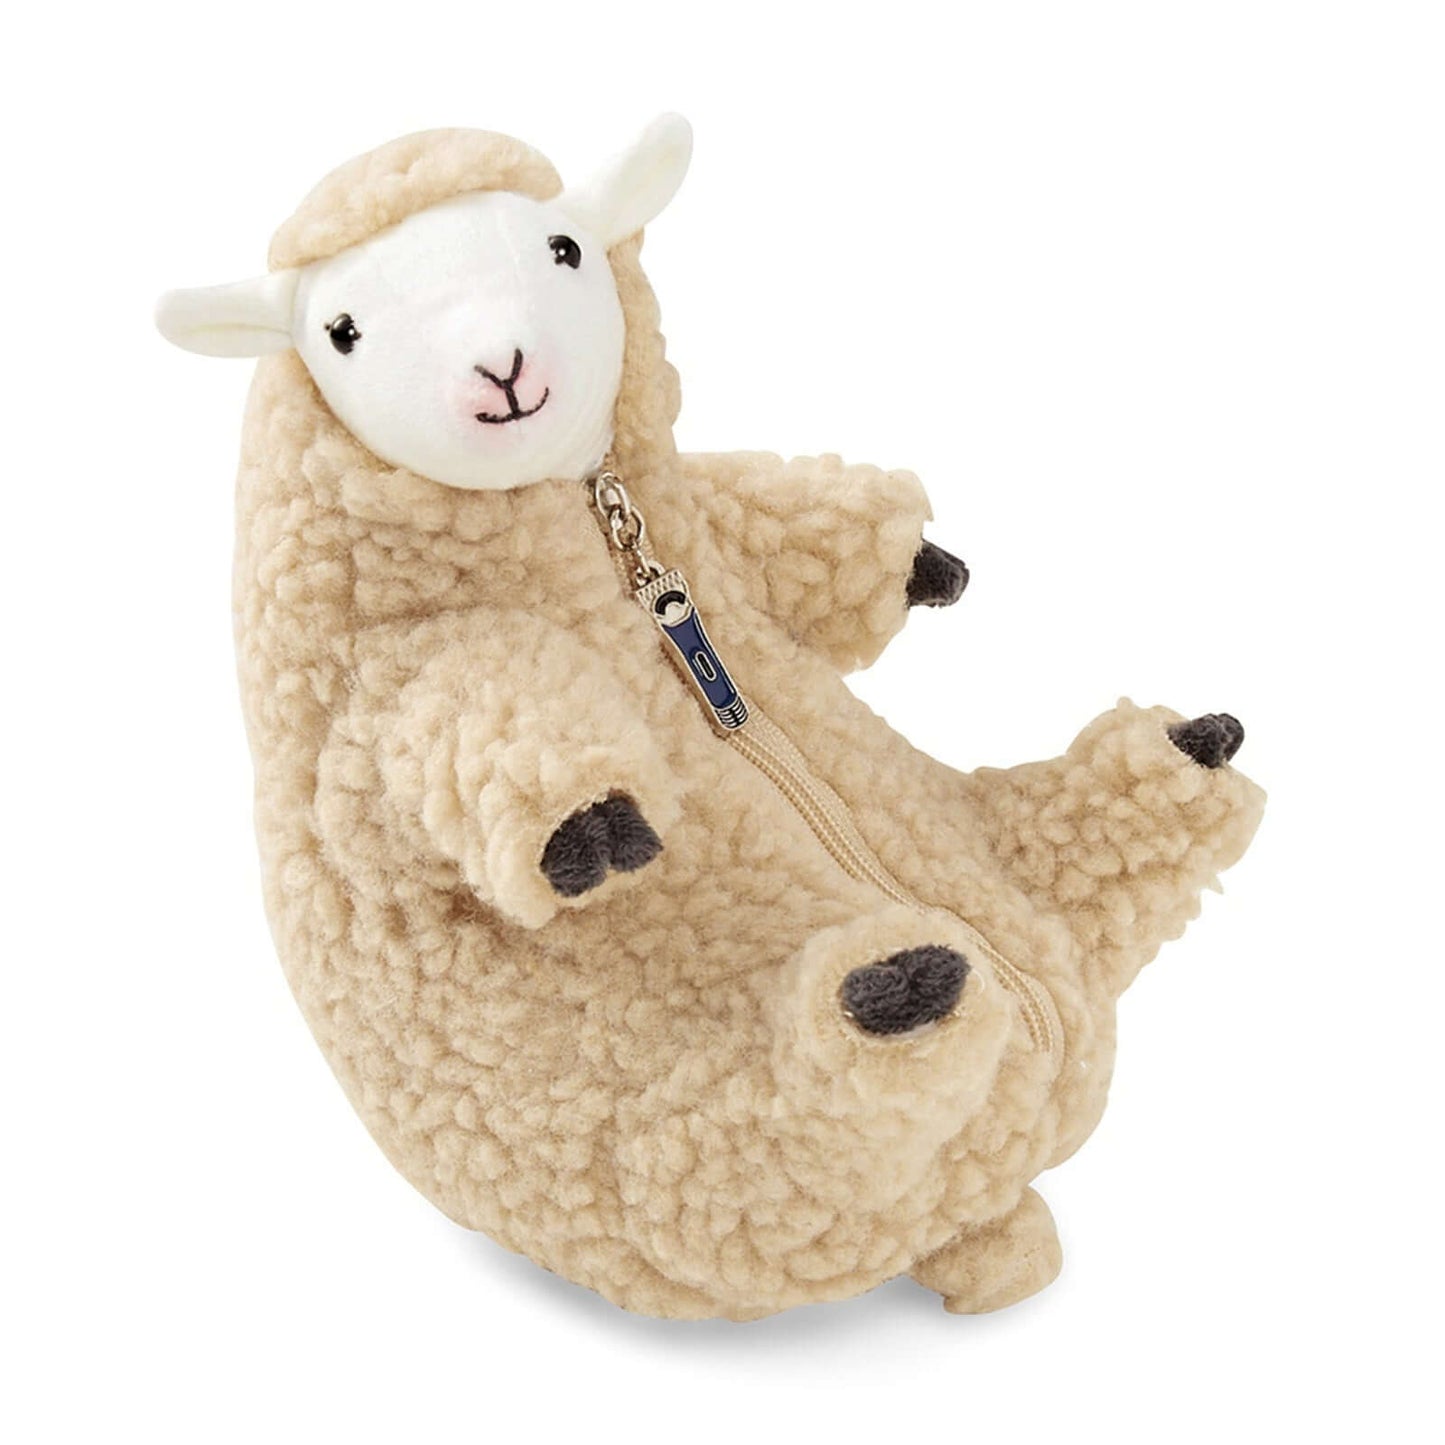 16CM Lovely Sheep Alpaca Doll Soft Plush Toy at $16.97 only from OddityGate